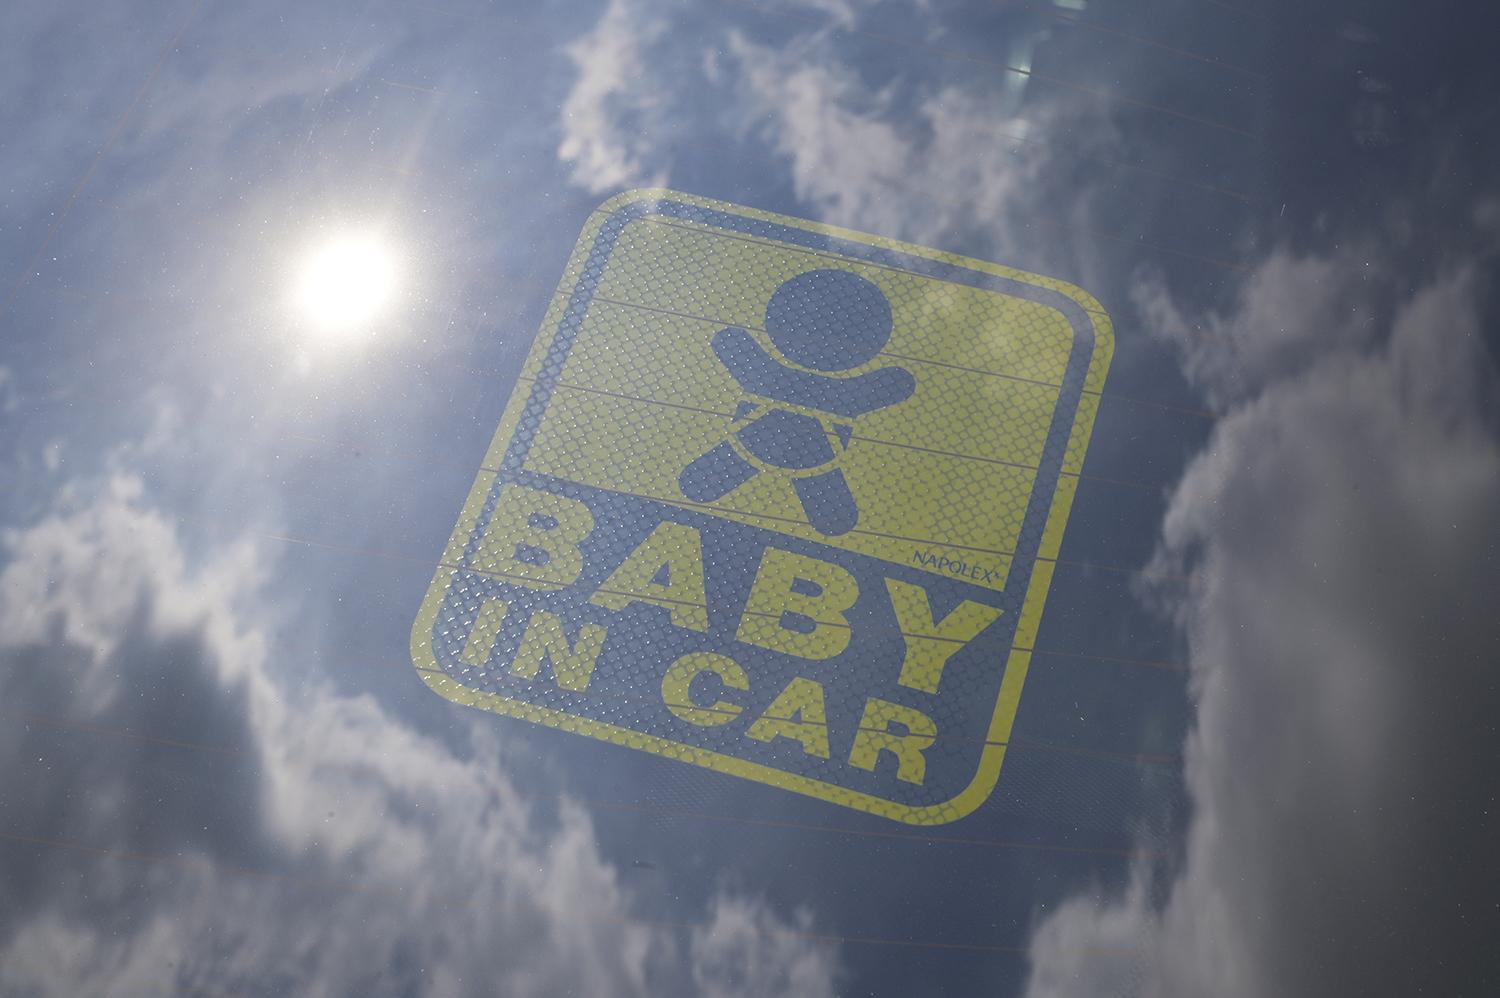 「BABY IN CAR」のステッカー